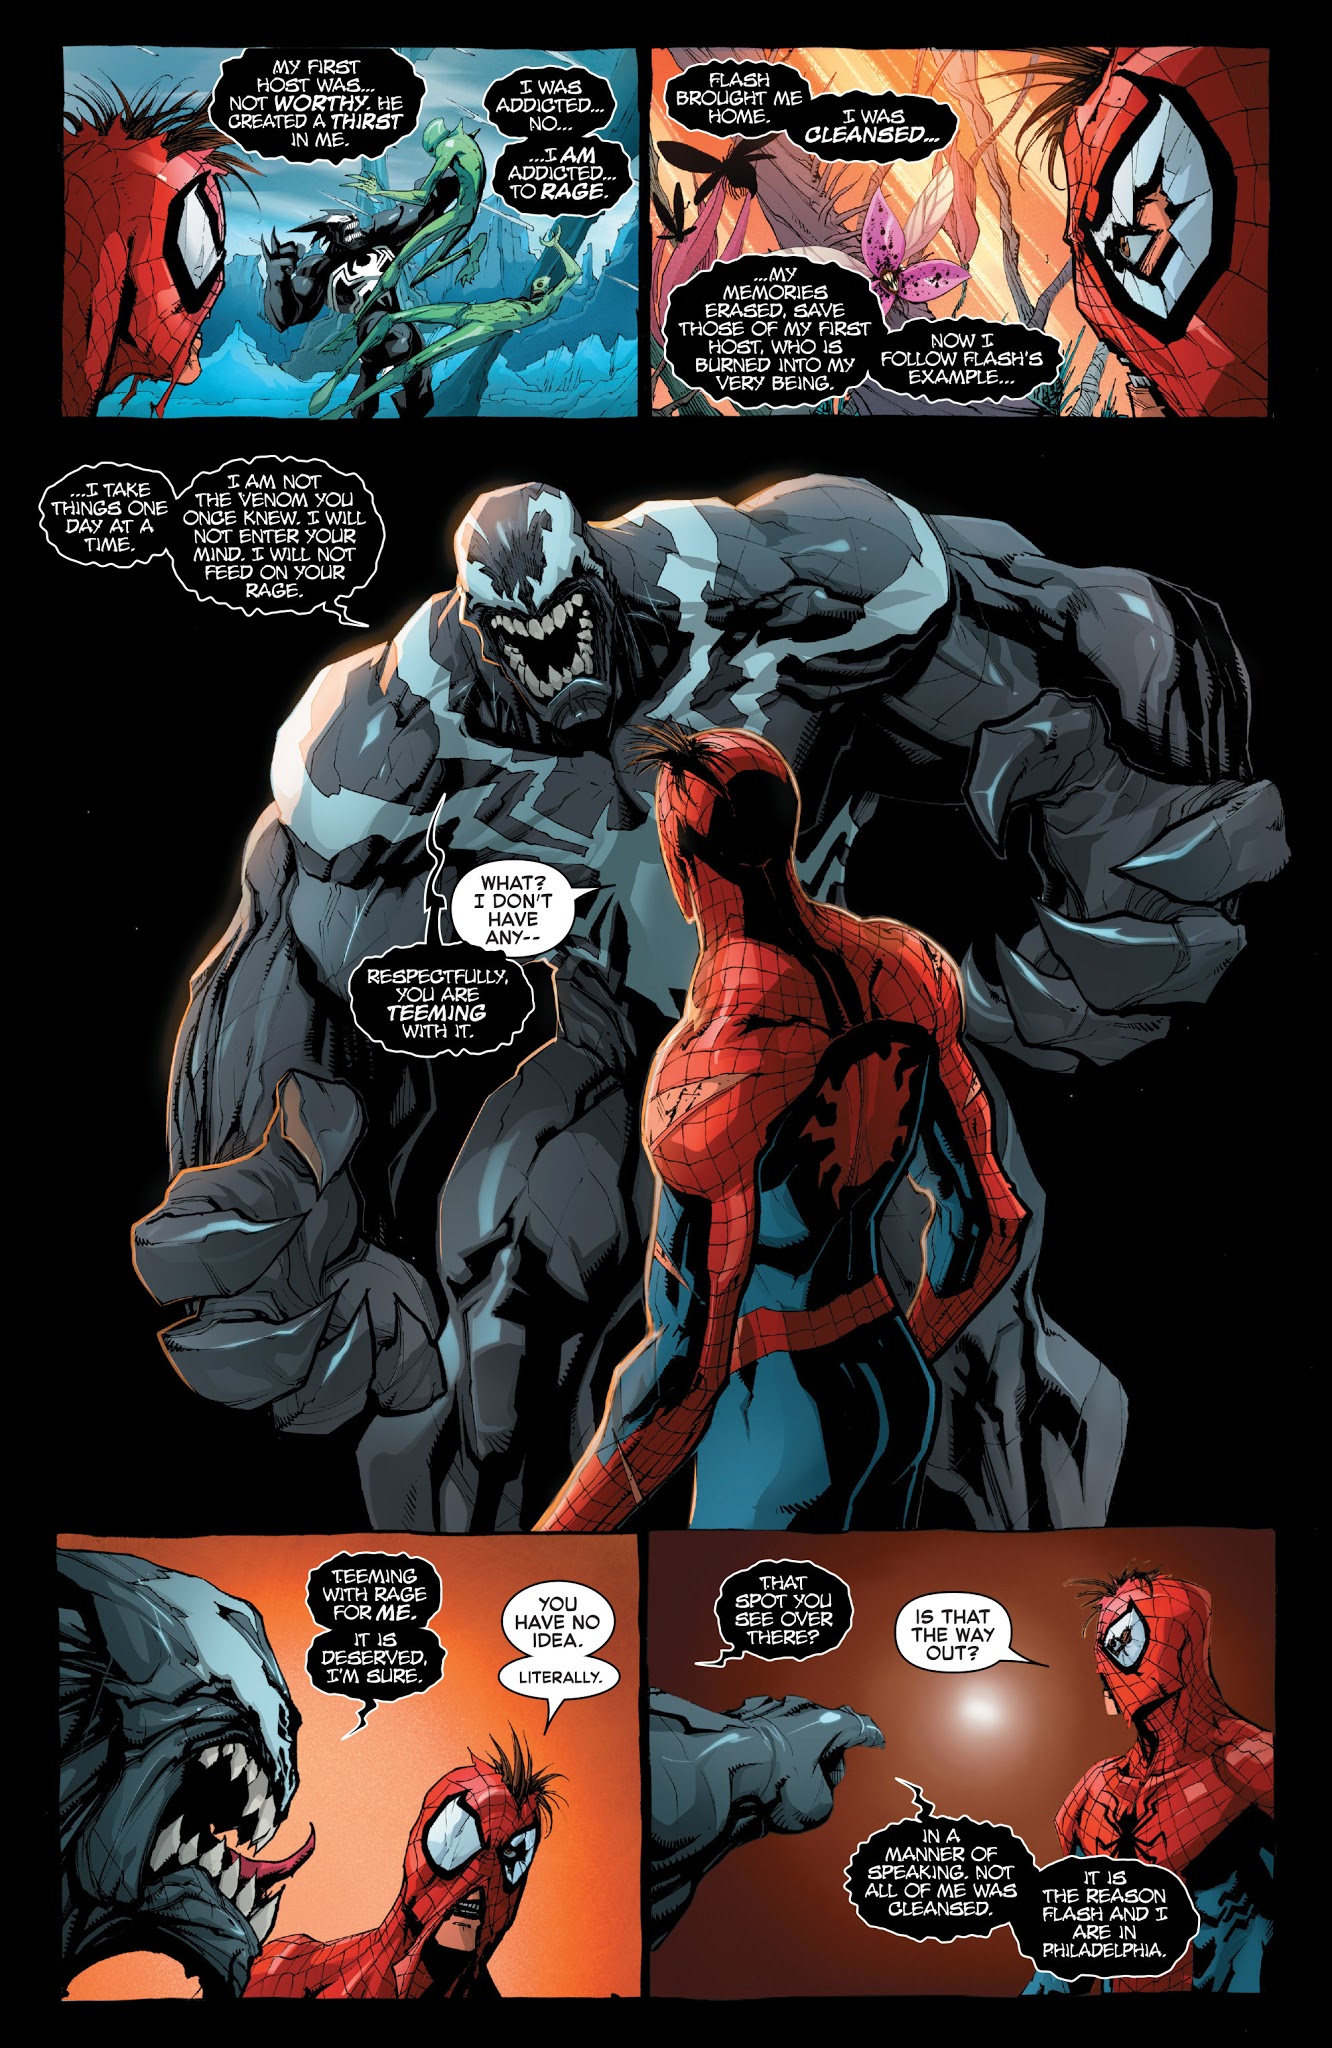 Marvel’s Venom Comic Is A Tragic, Haunting Story About Emotional Codependence